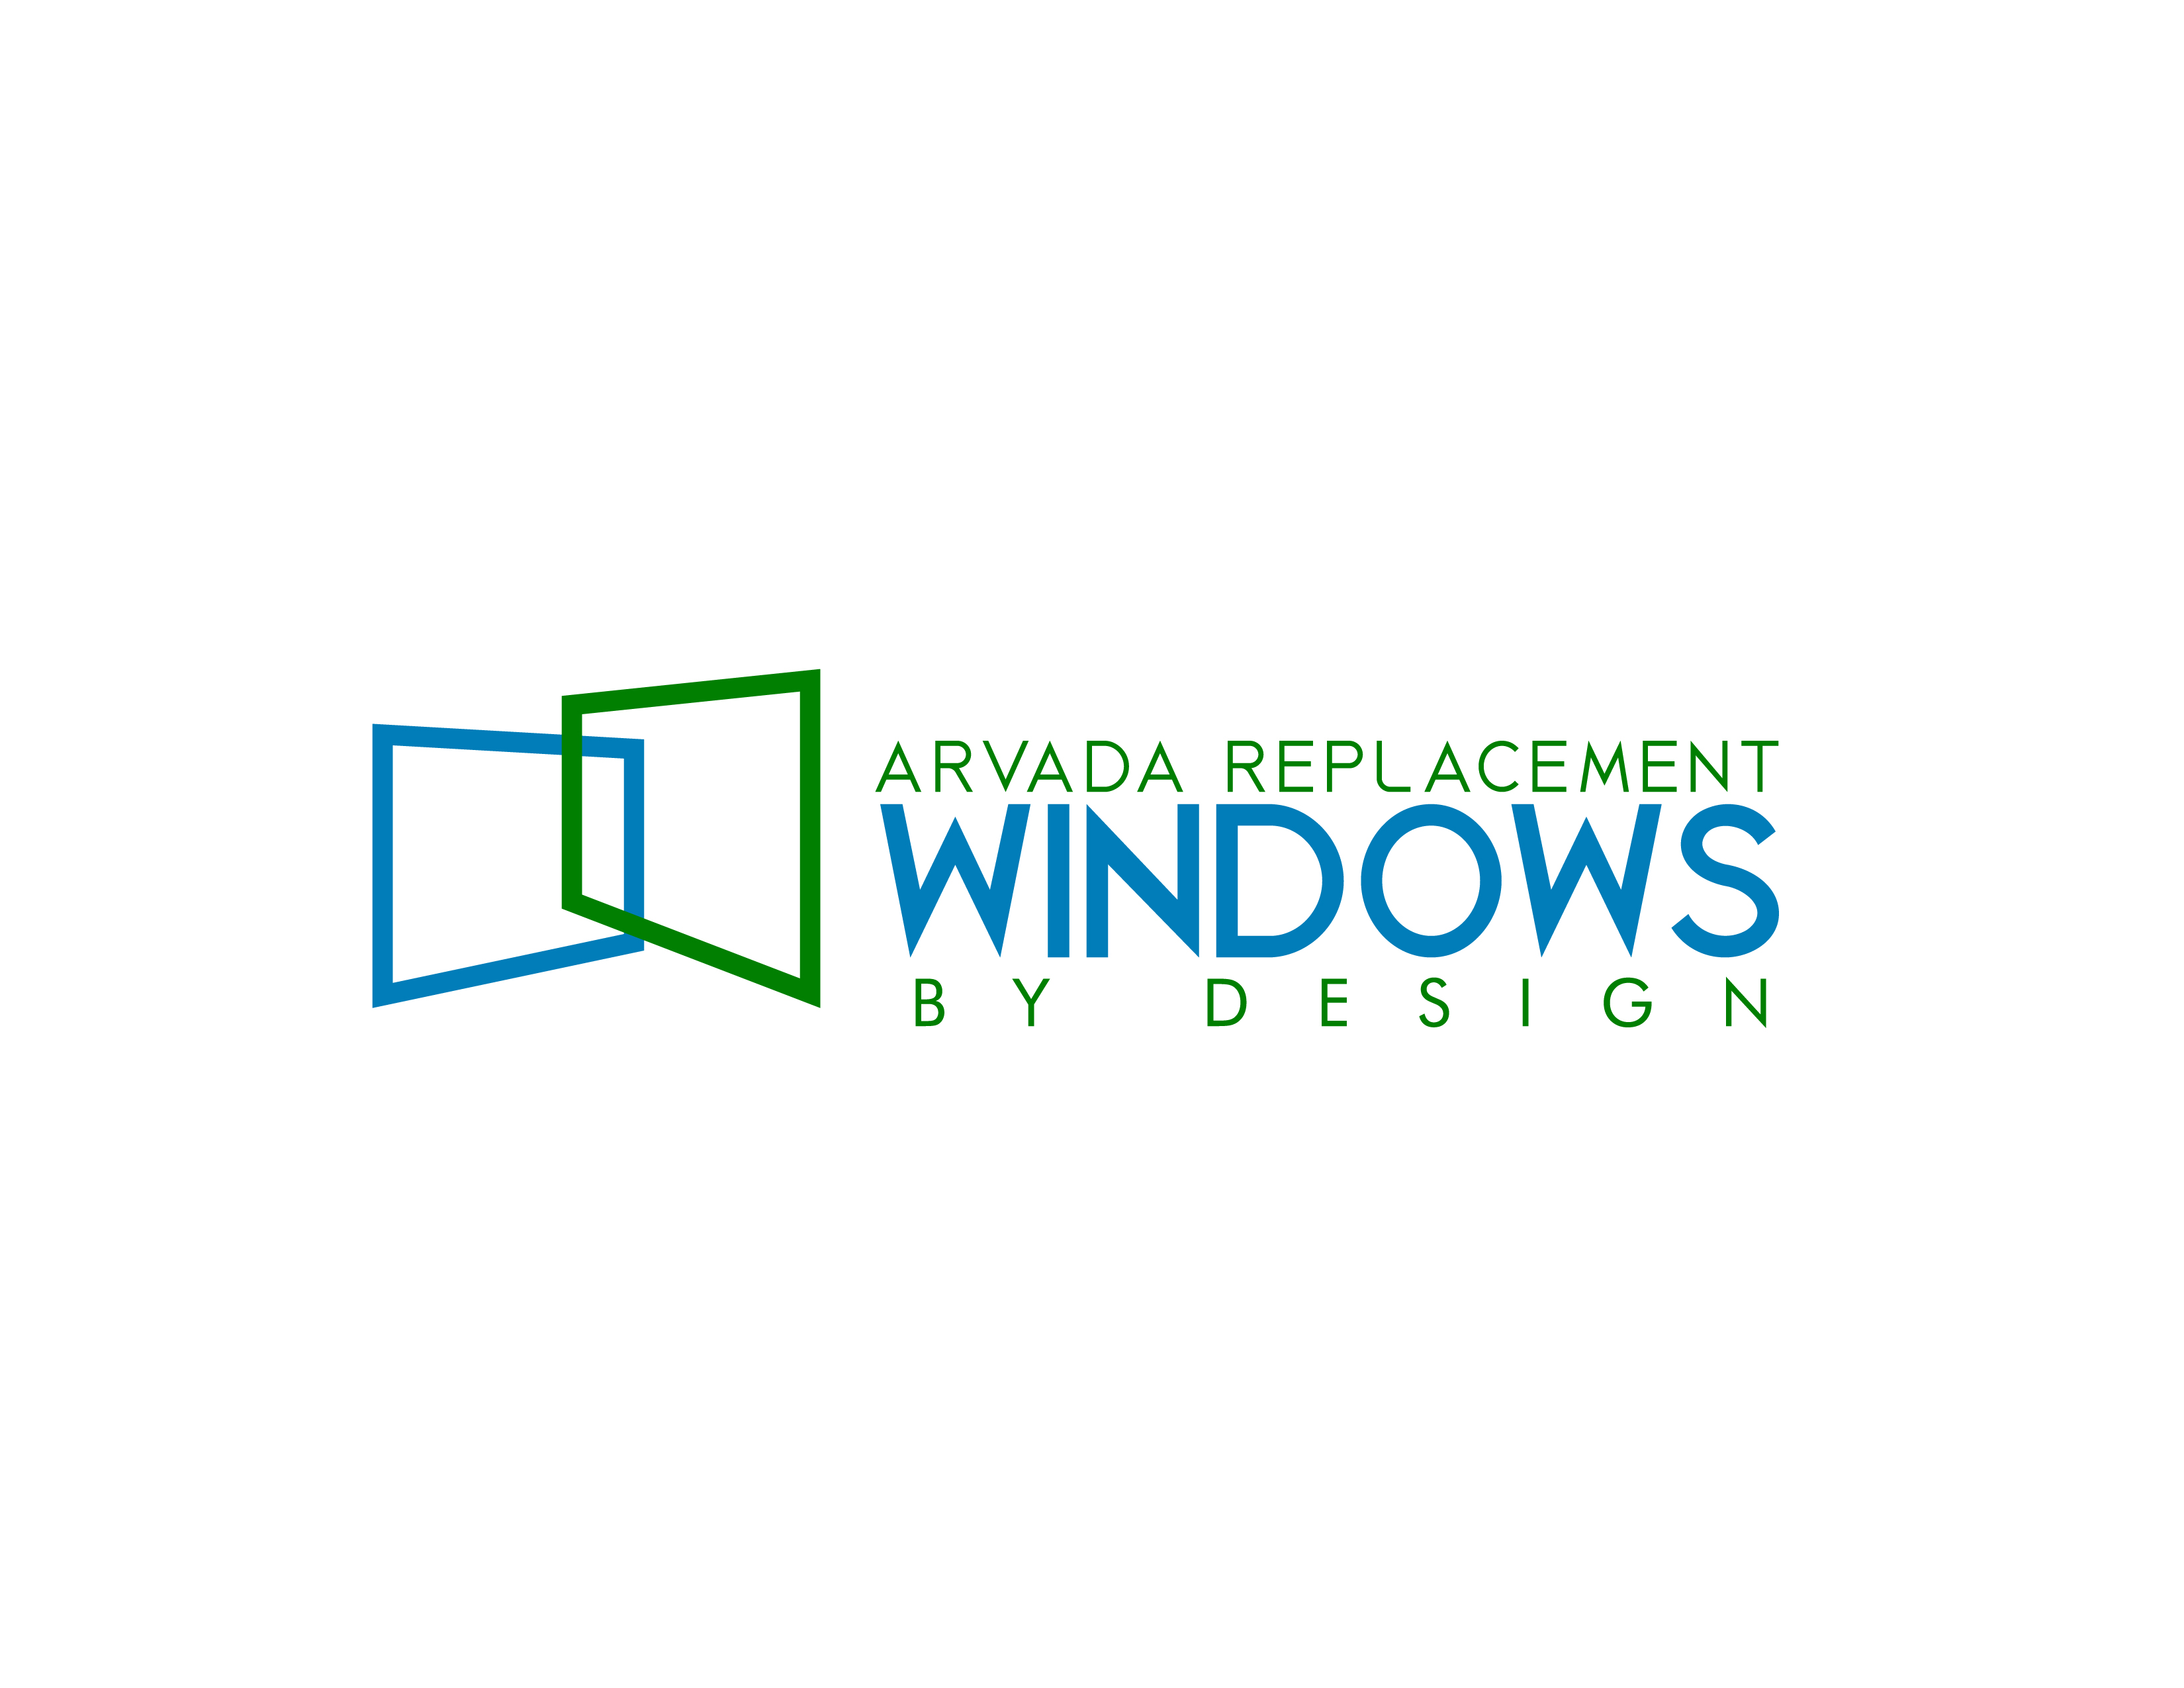 Arvada Replacement Windows By Design Advises On Things Clients Should Inquire About Warranties On New Windows